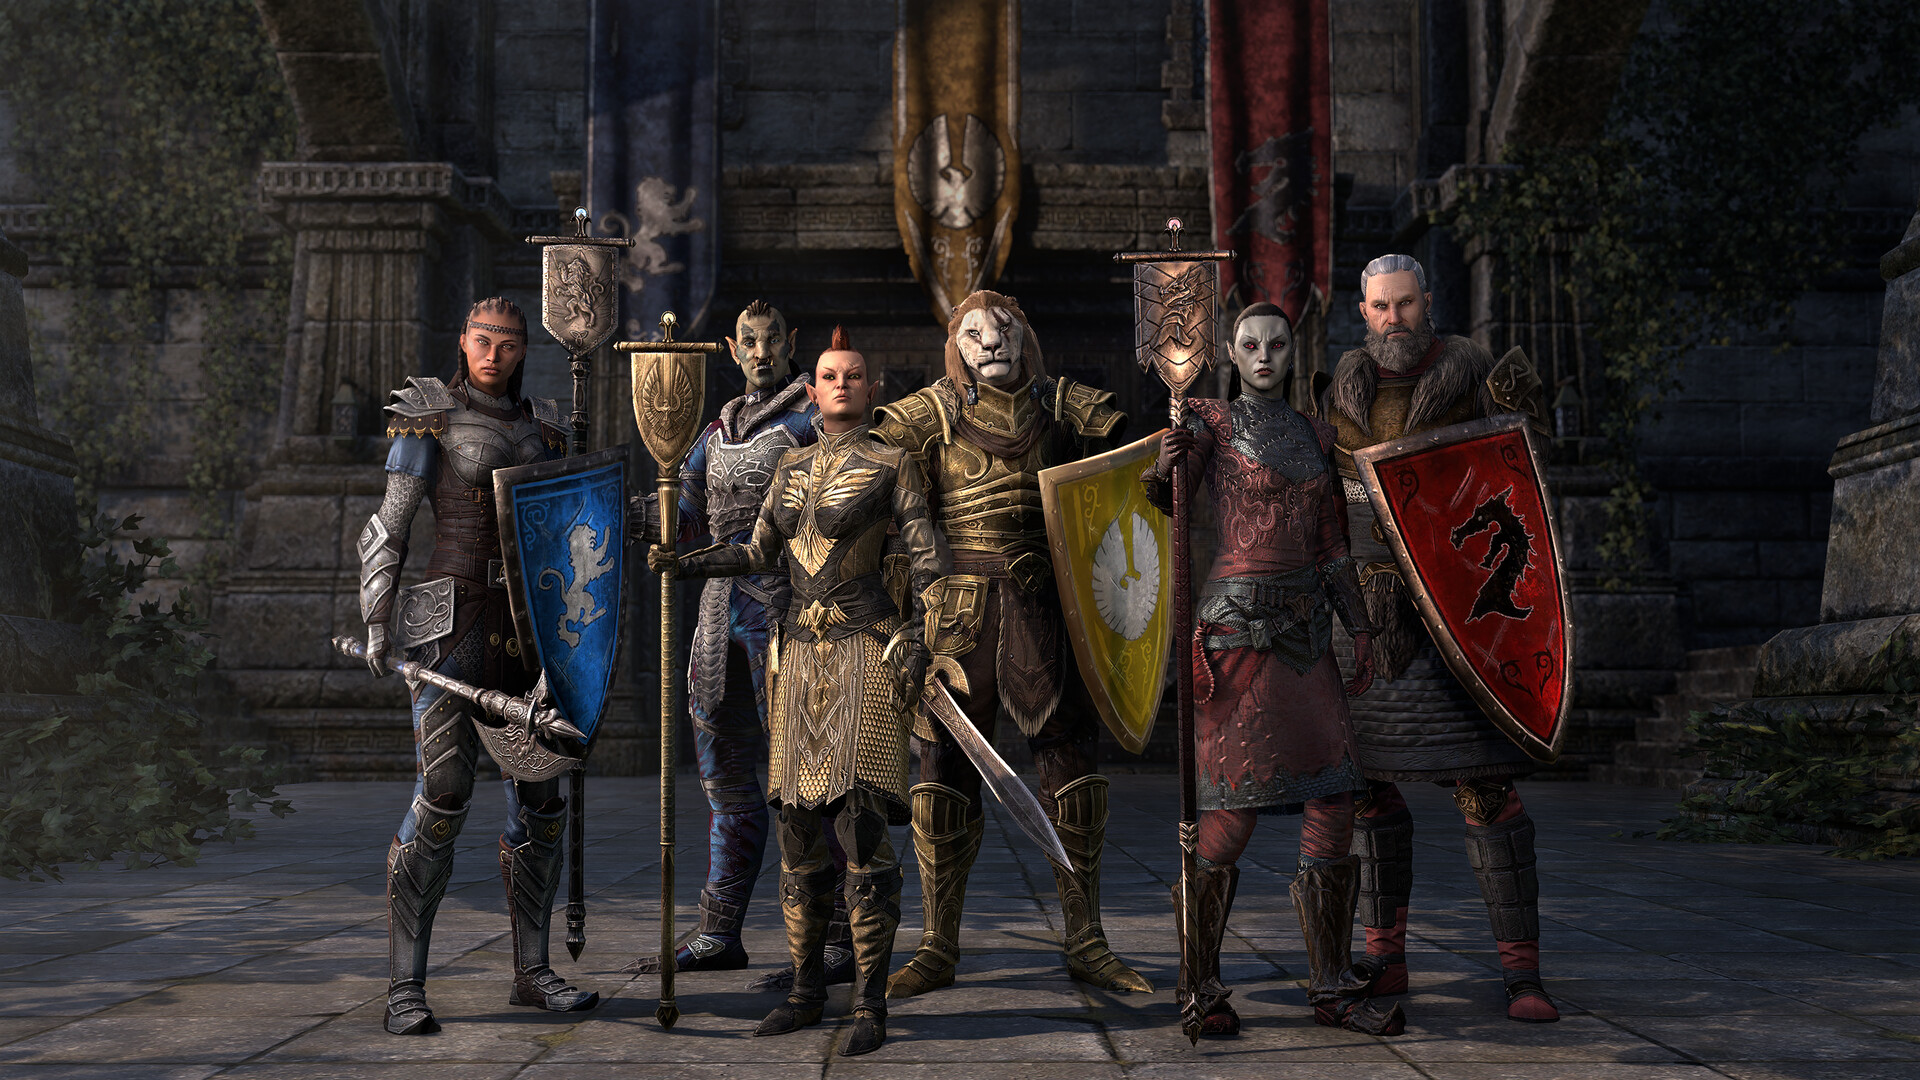 Elder Scrolls Online is Currently Available for Free-to-Play on Steam -  MySmartPrice